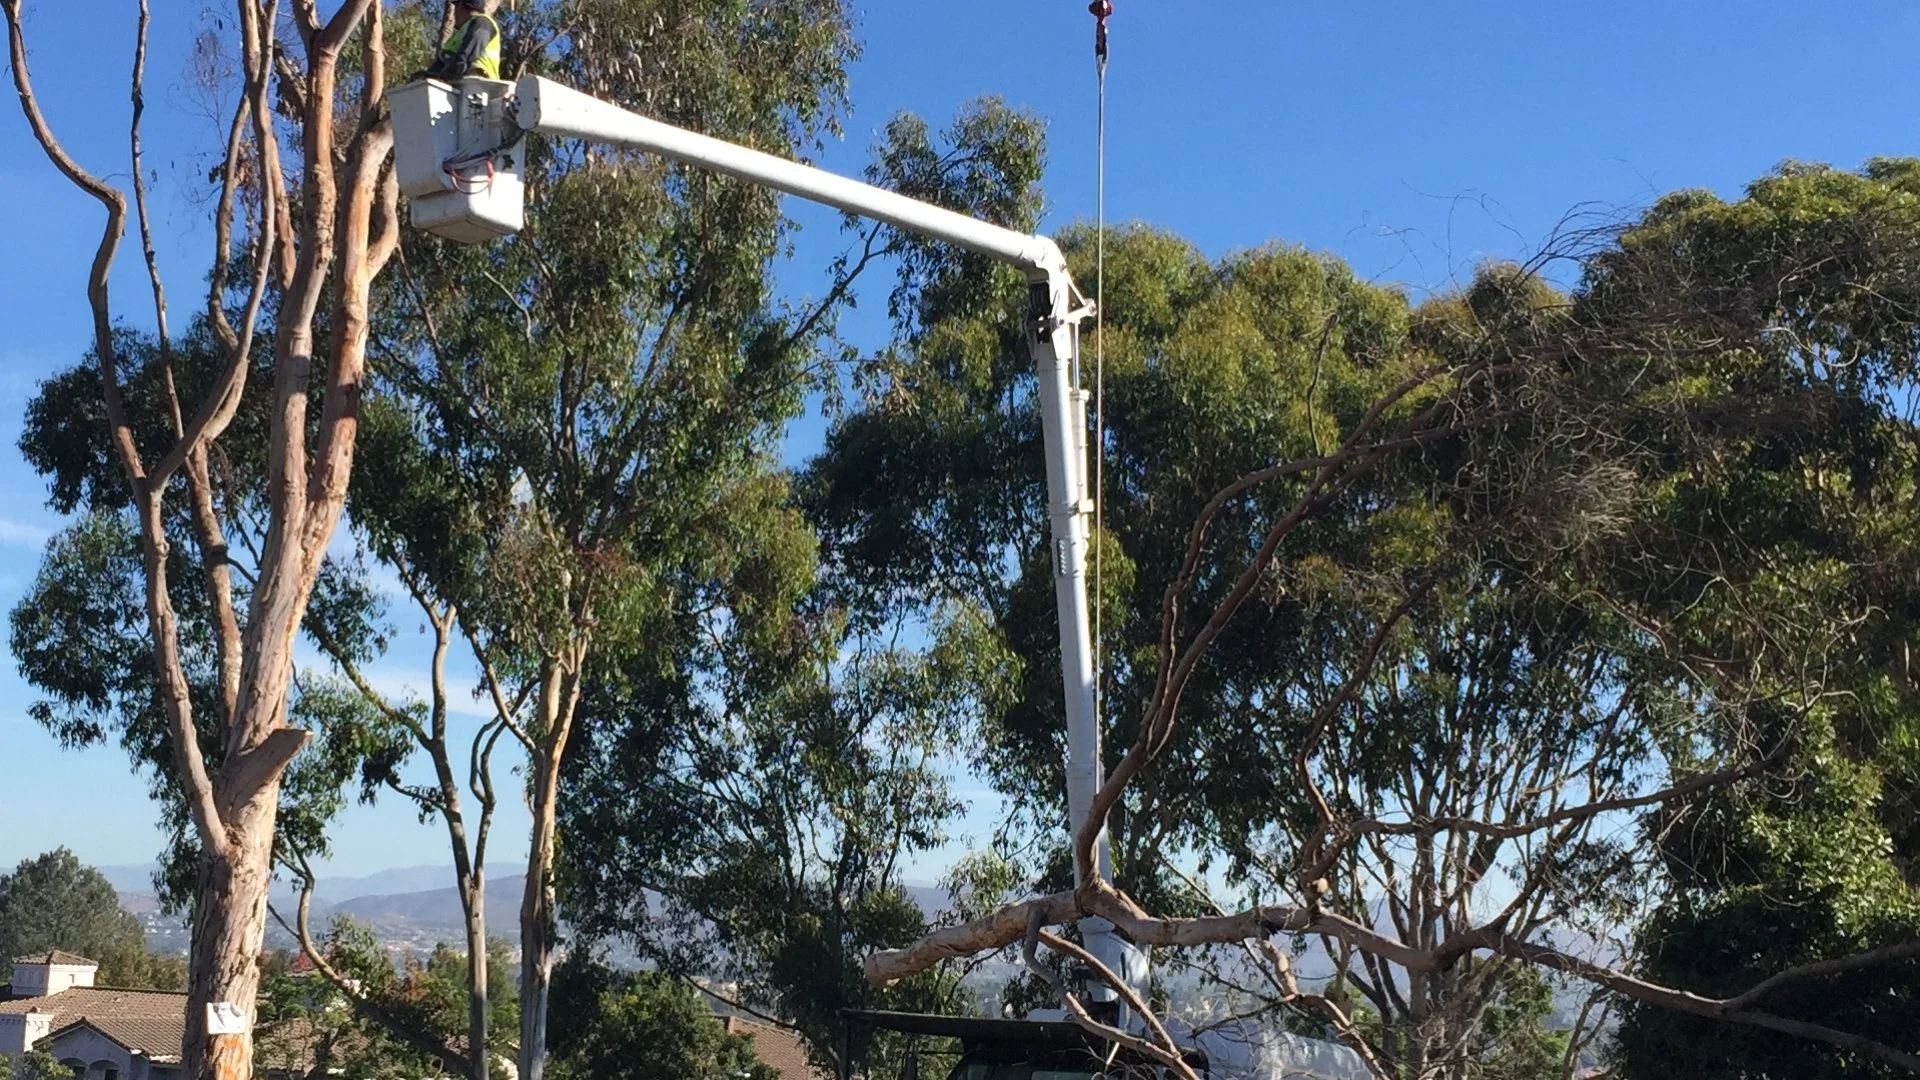 Crew members removing a tree with a crane.